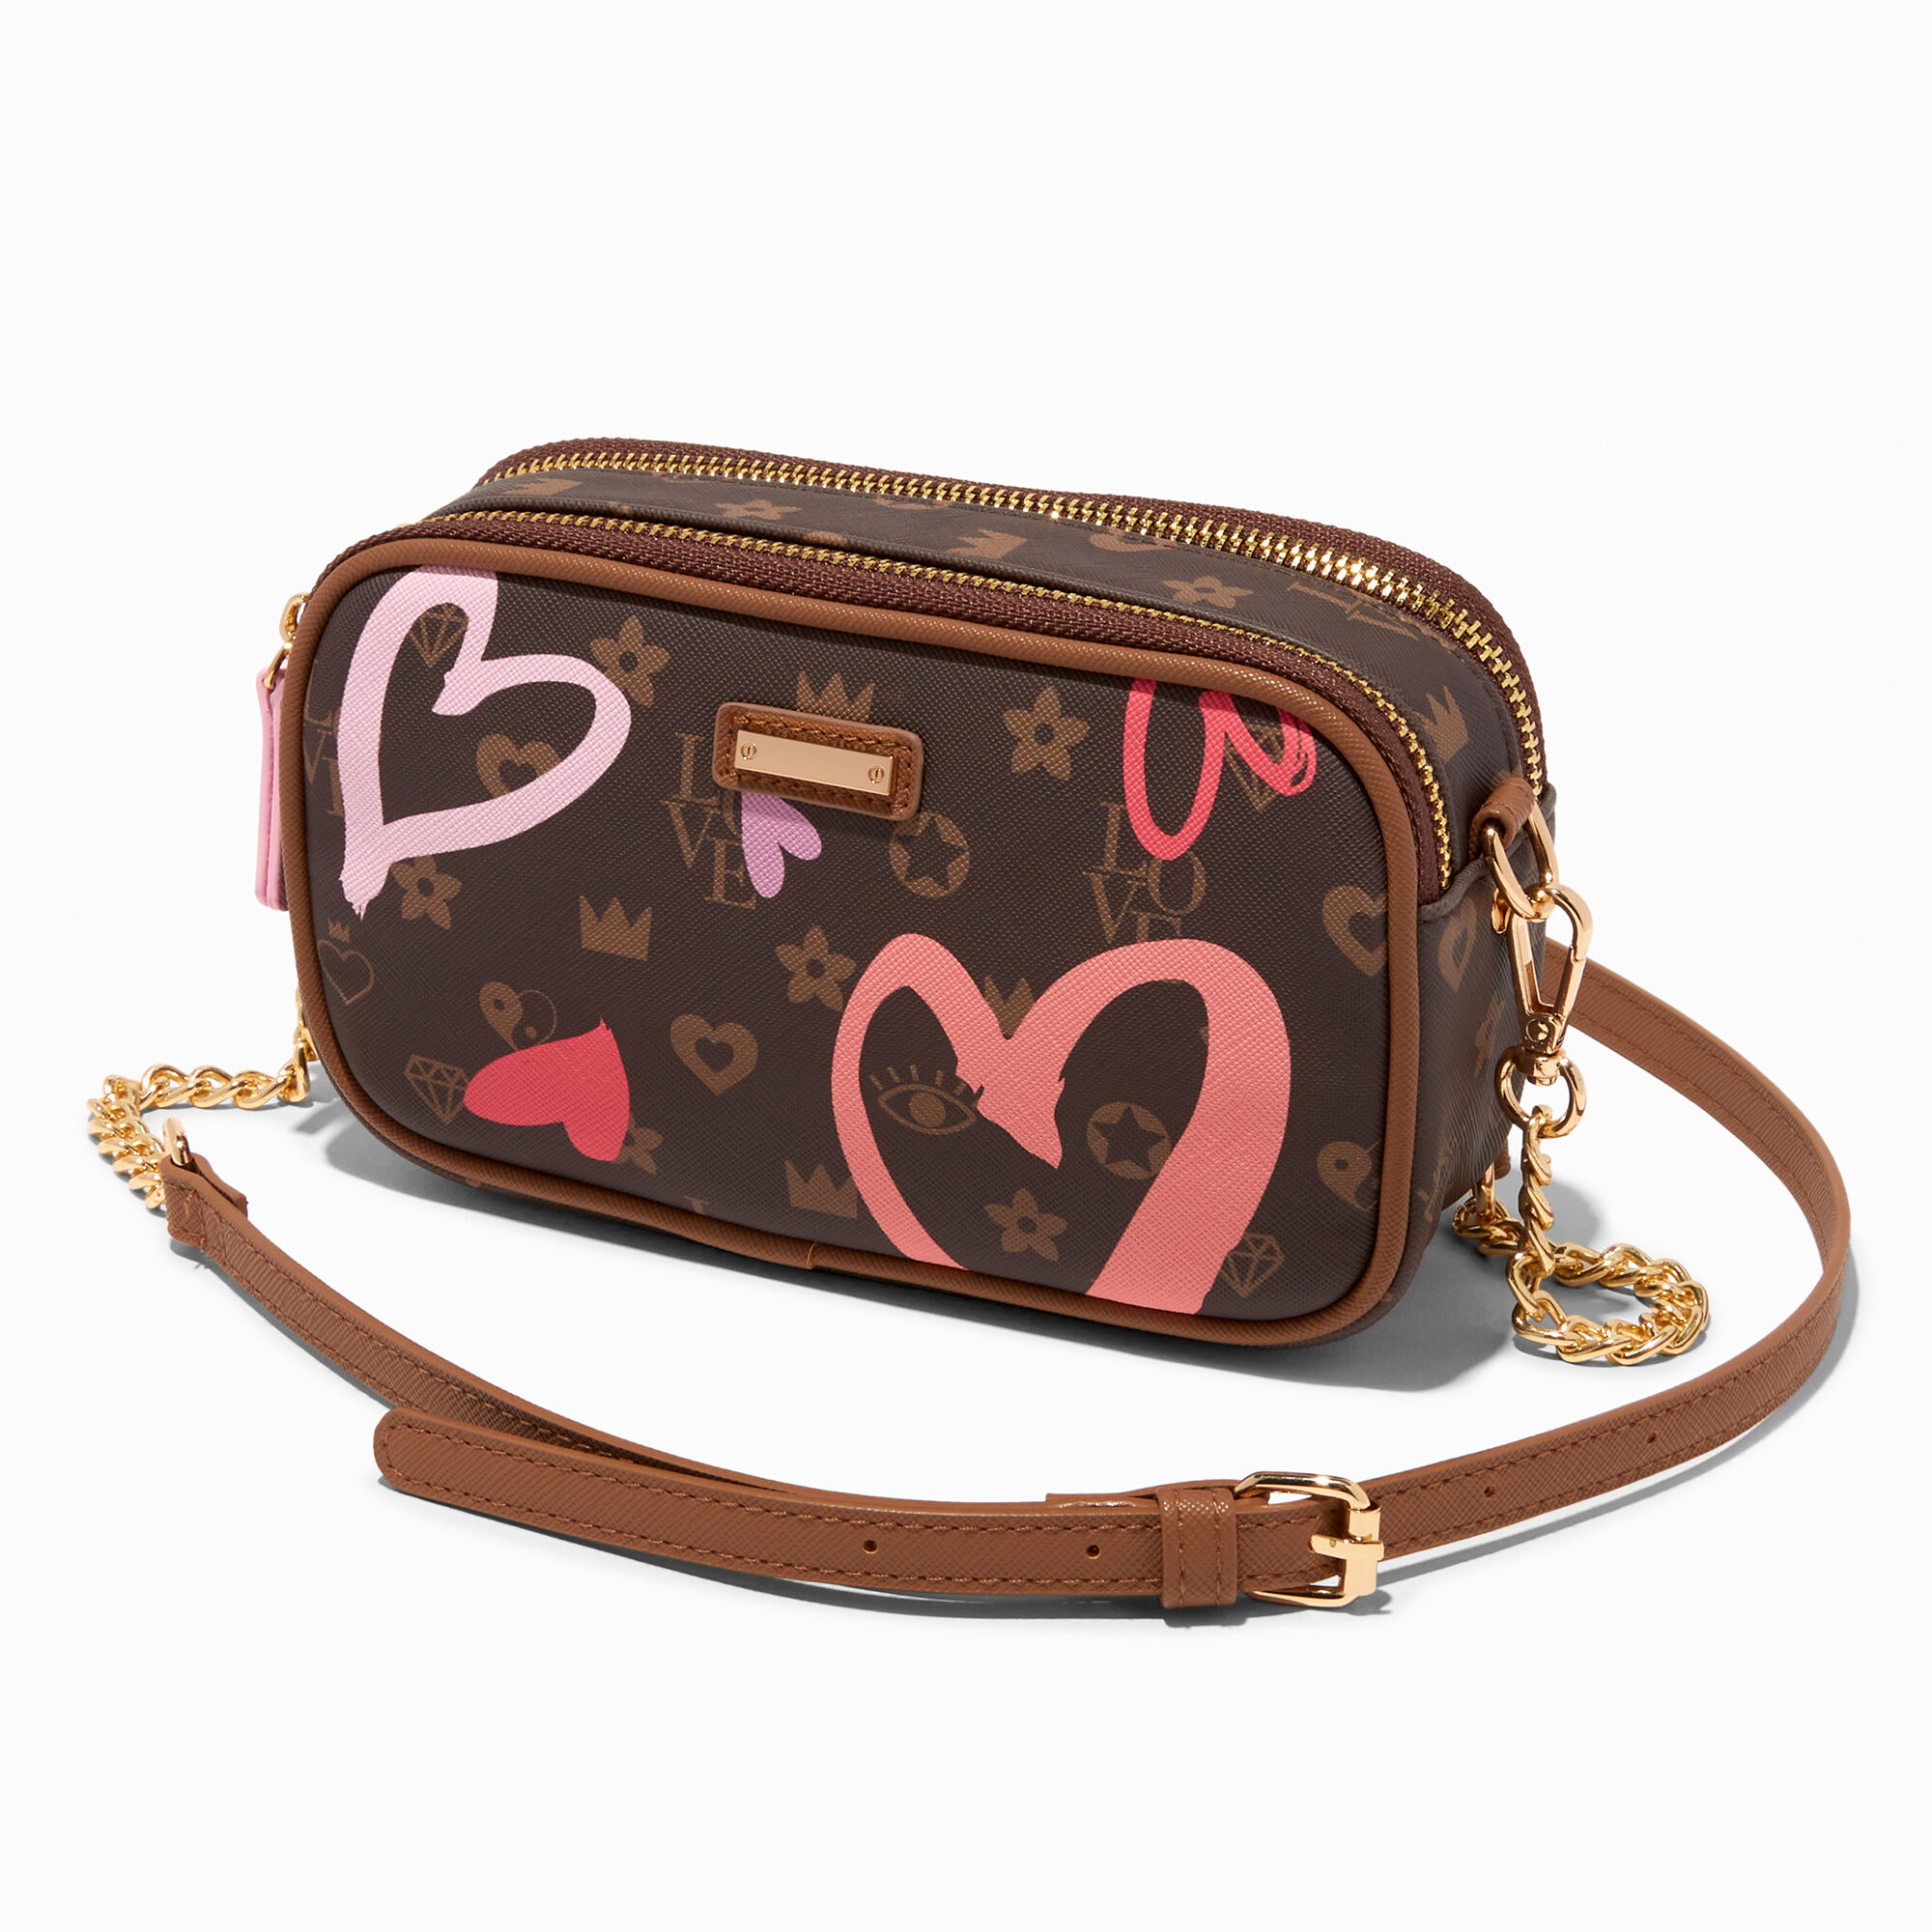 View Claires Status Icons Hearts Camera Style Crossbody Bag Brown information